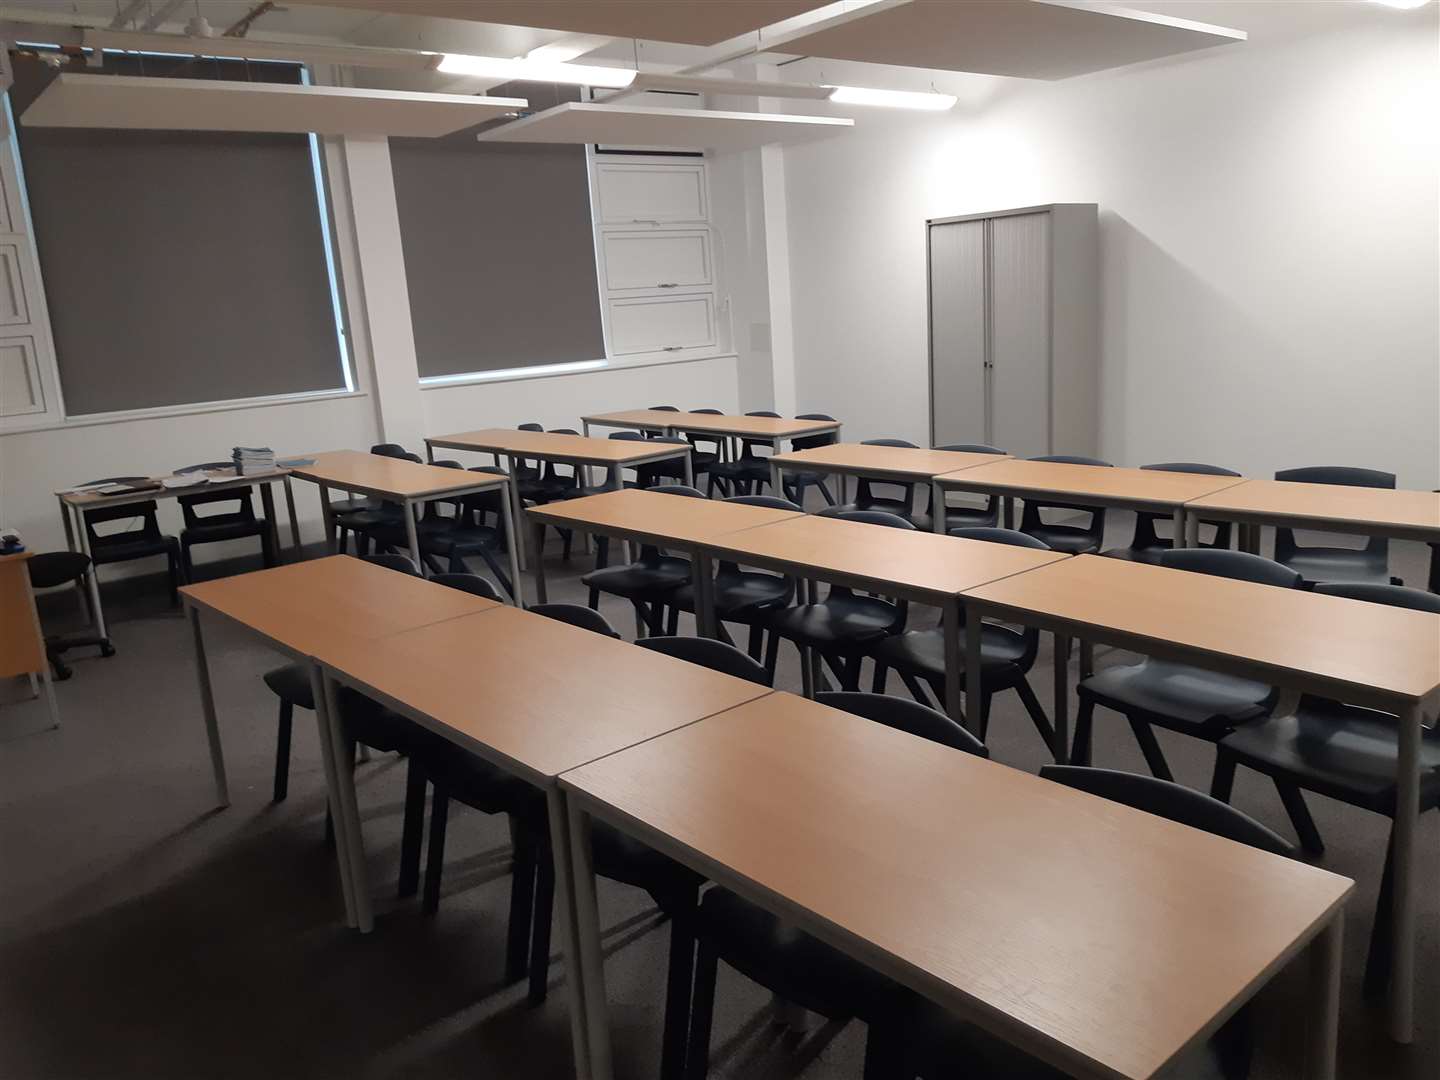 One of the new classrooms